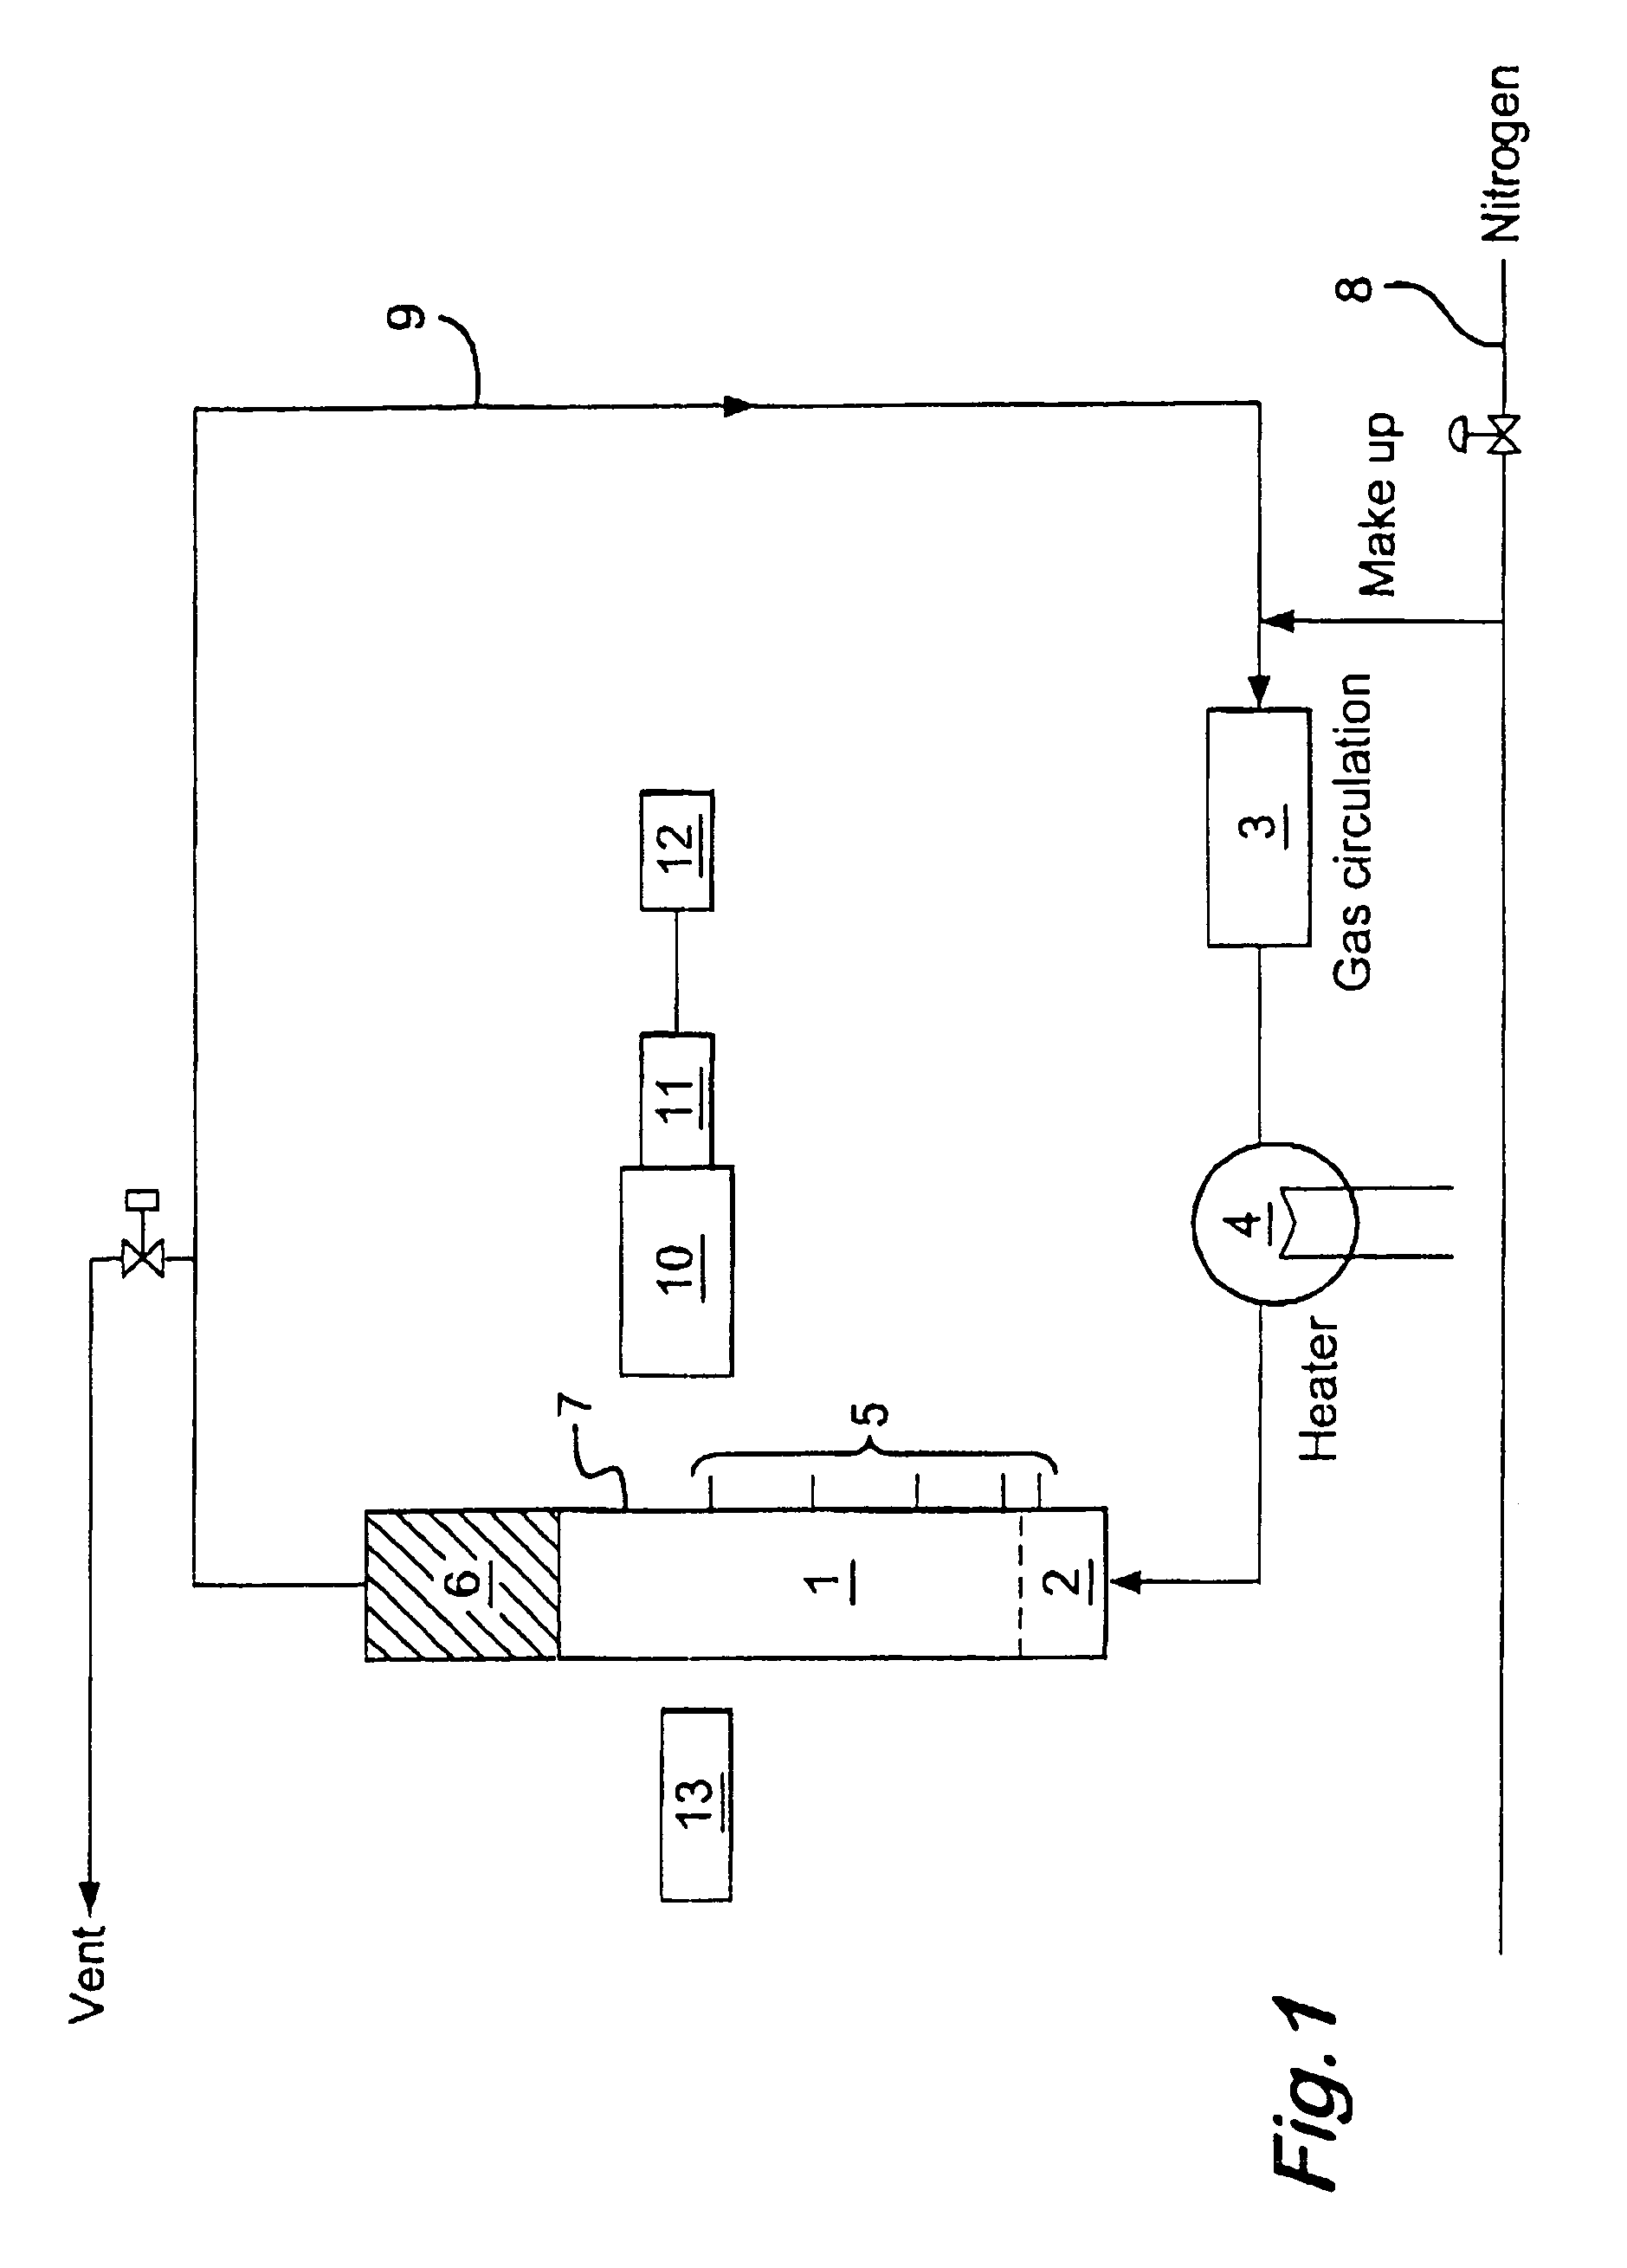 Oxidation process in fluidized bed reactor